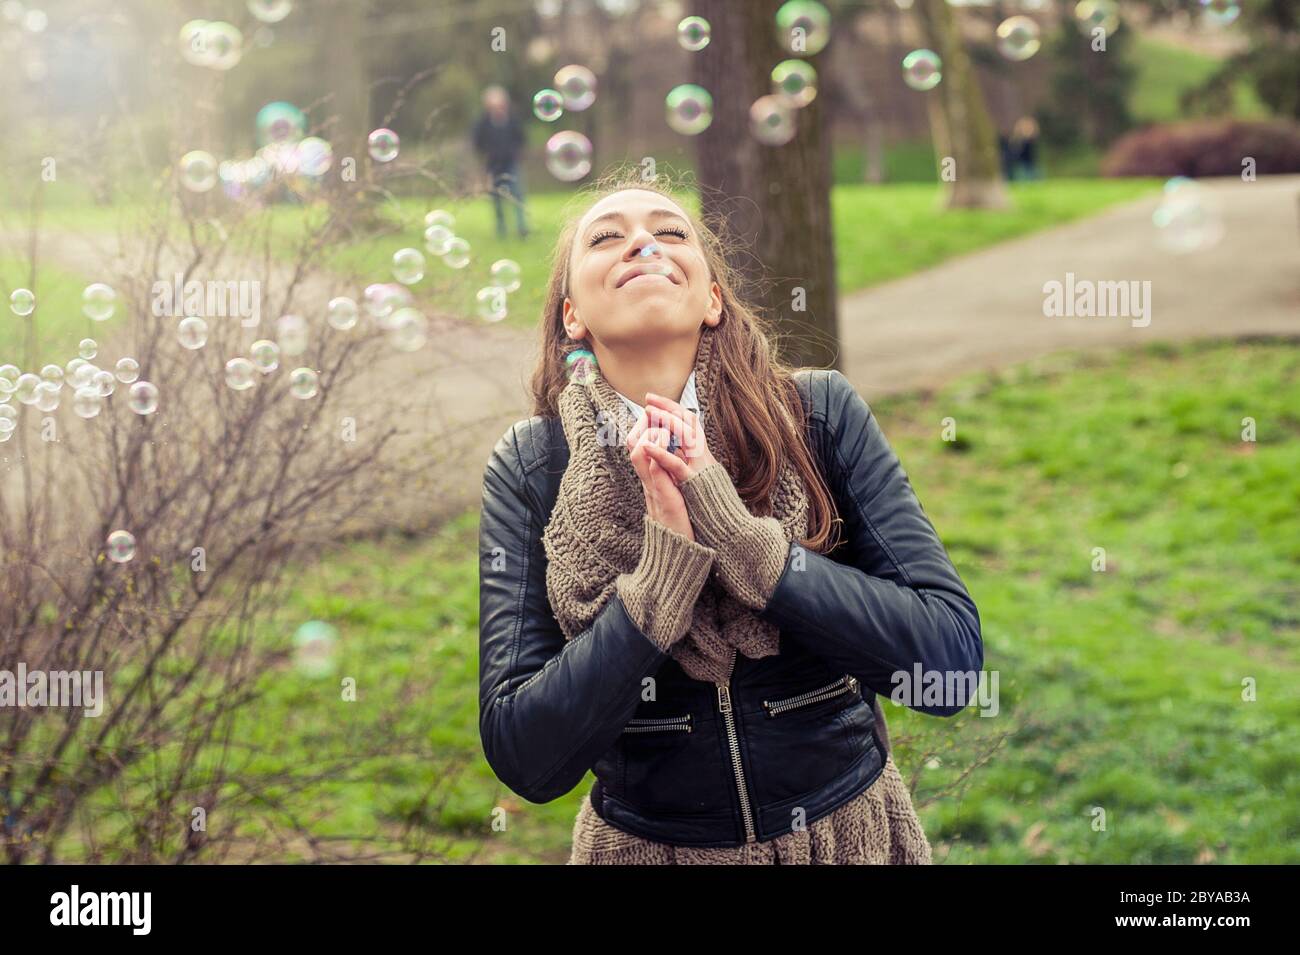 Happy and satisfied young woman enjoying life Stock Photo